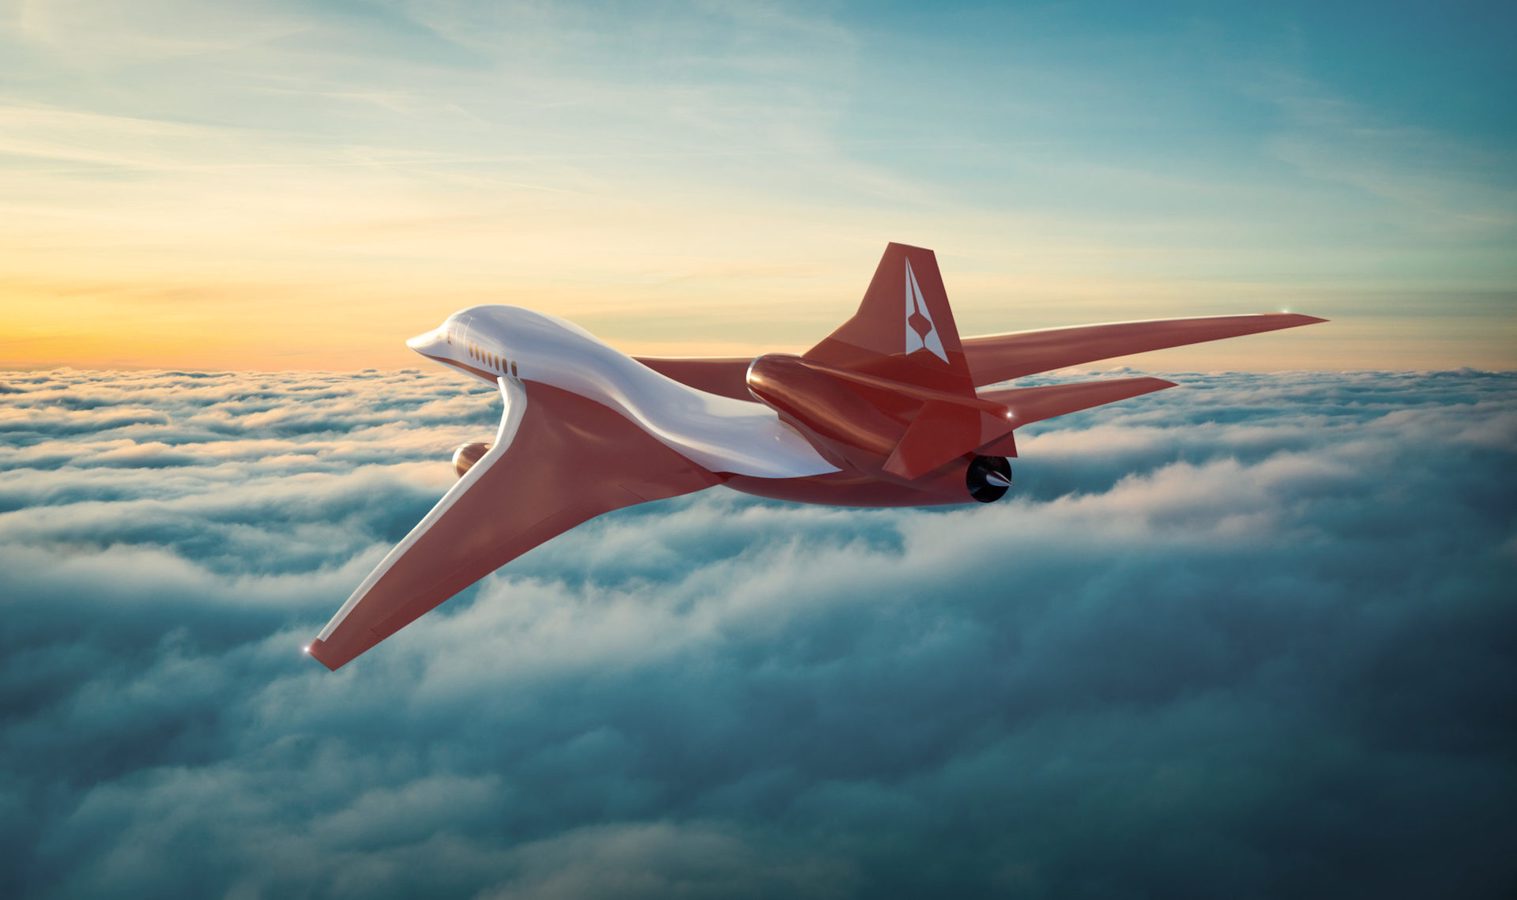 AS2 Supersonic Business Jet